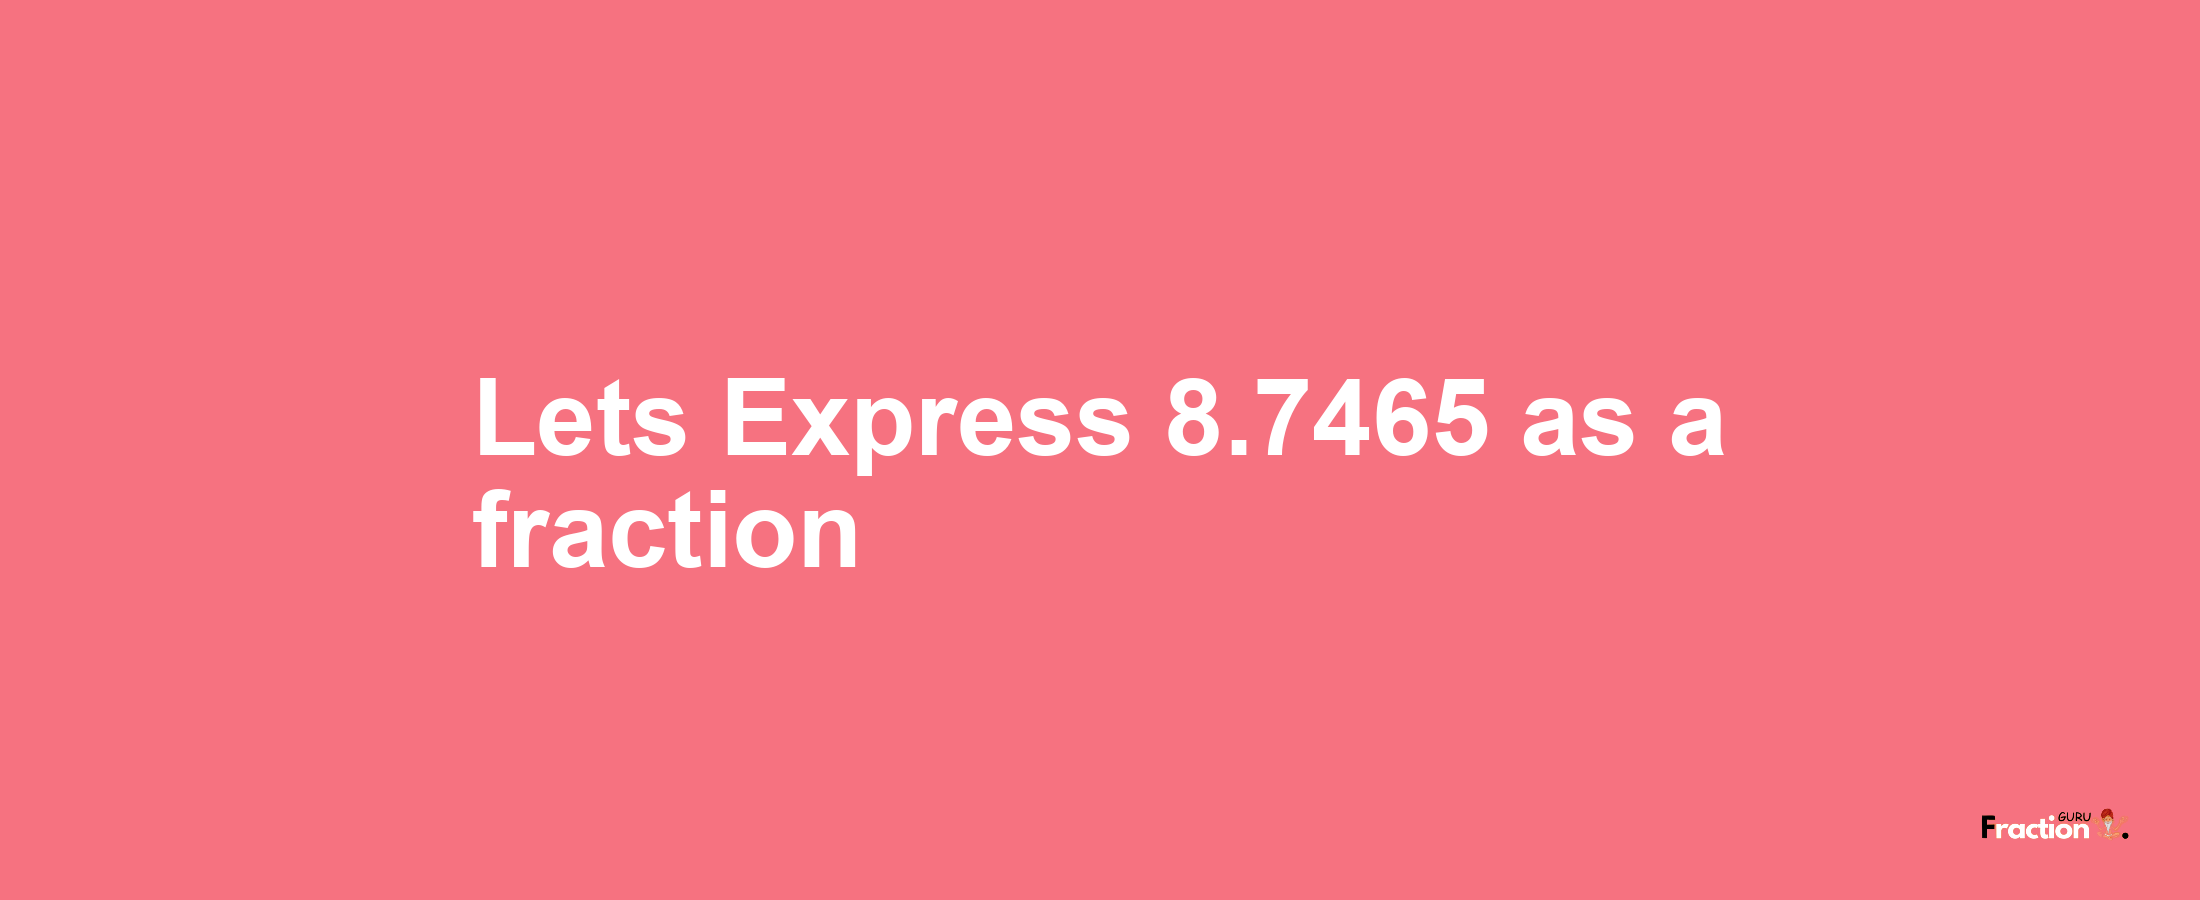 Lets Express 8.7465 as afraction